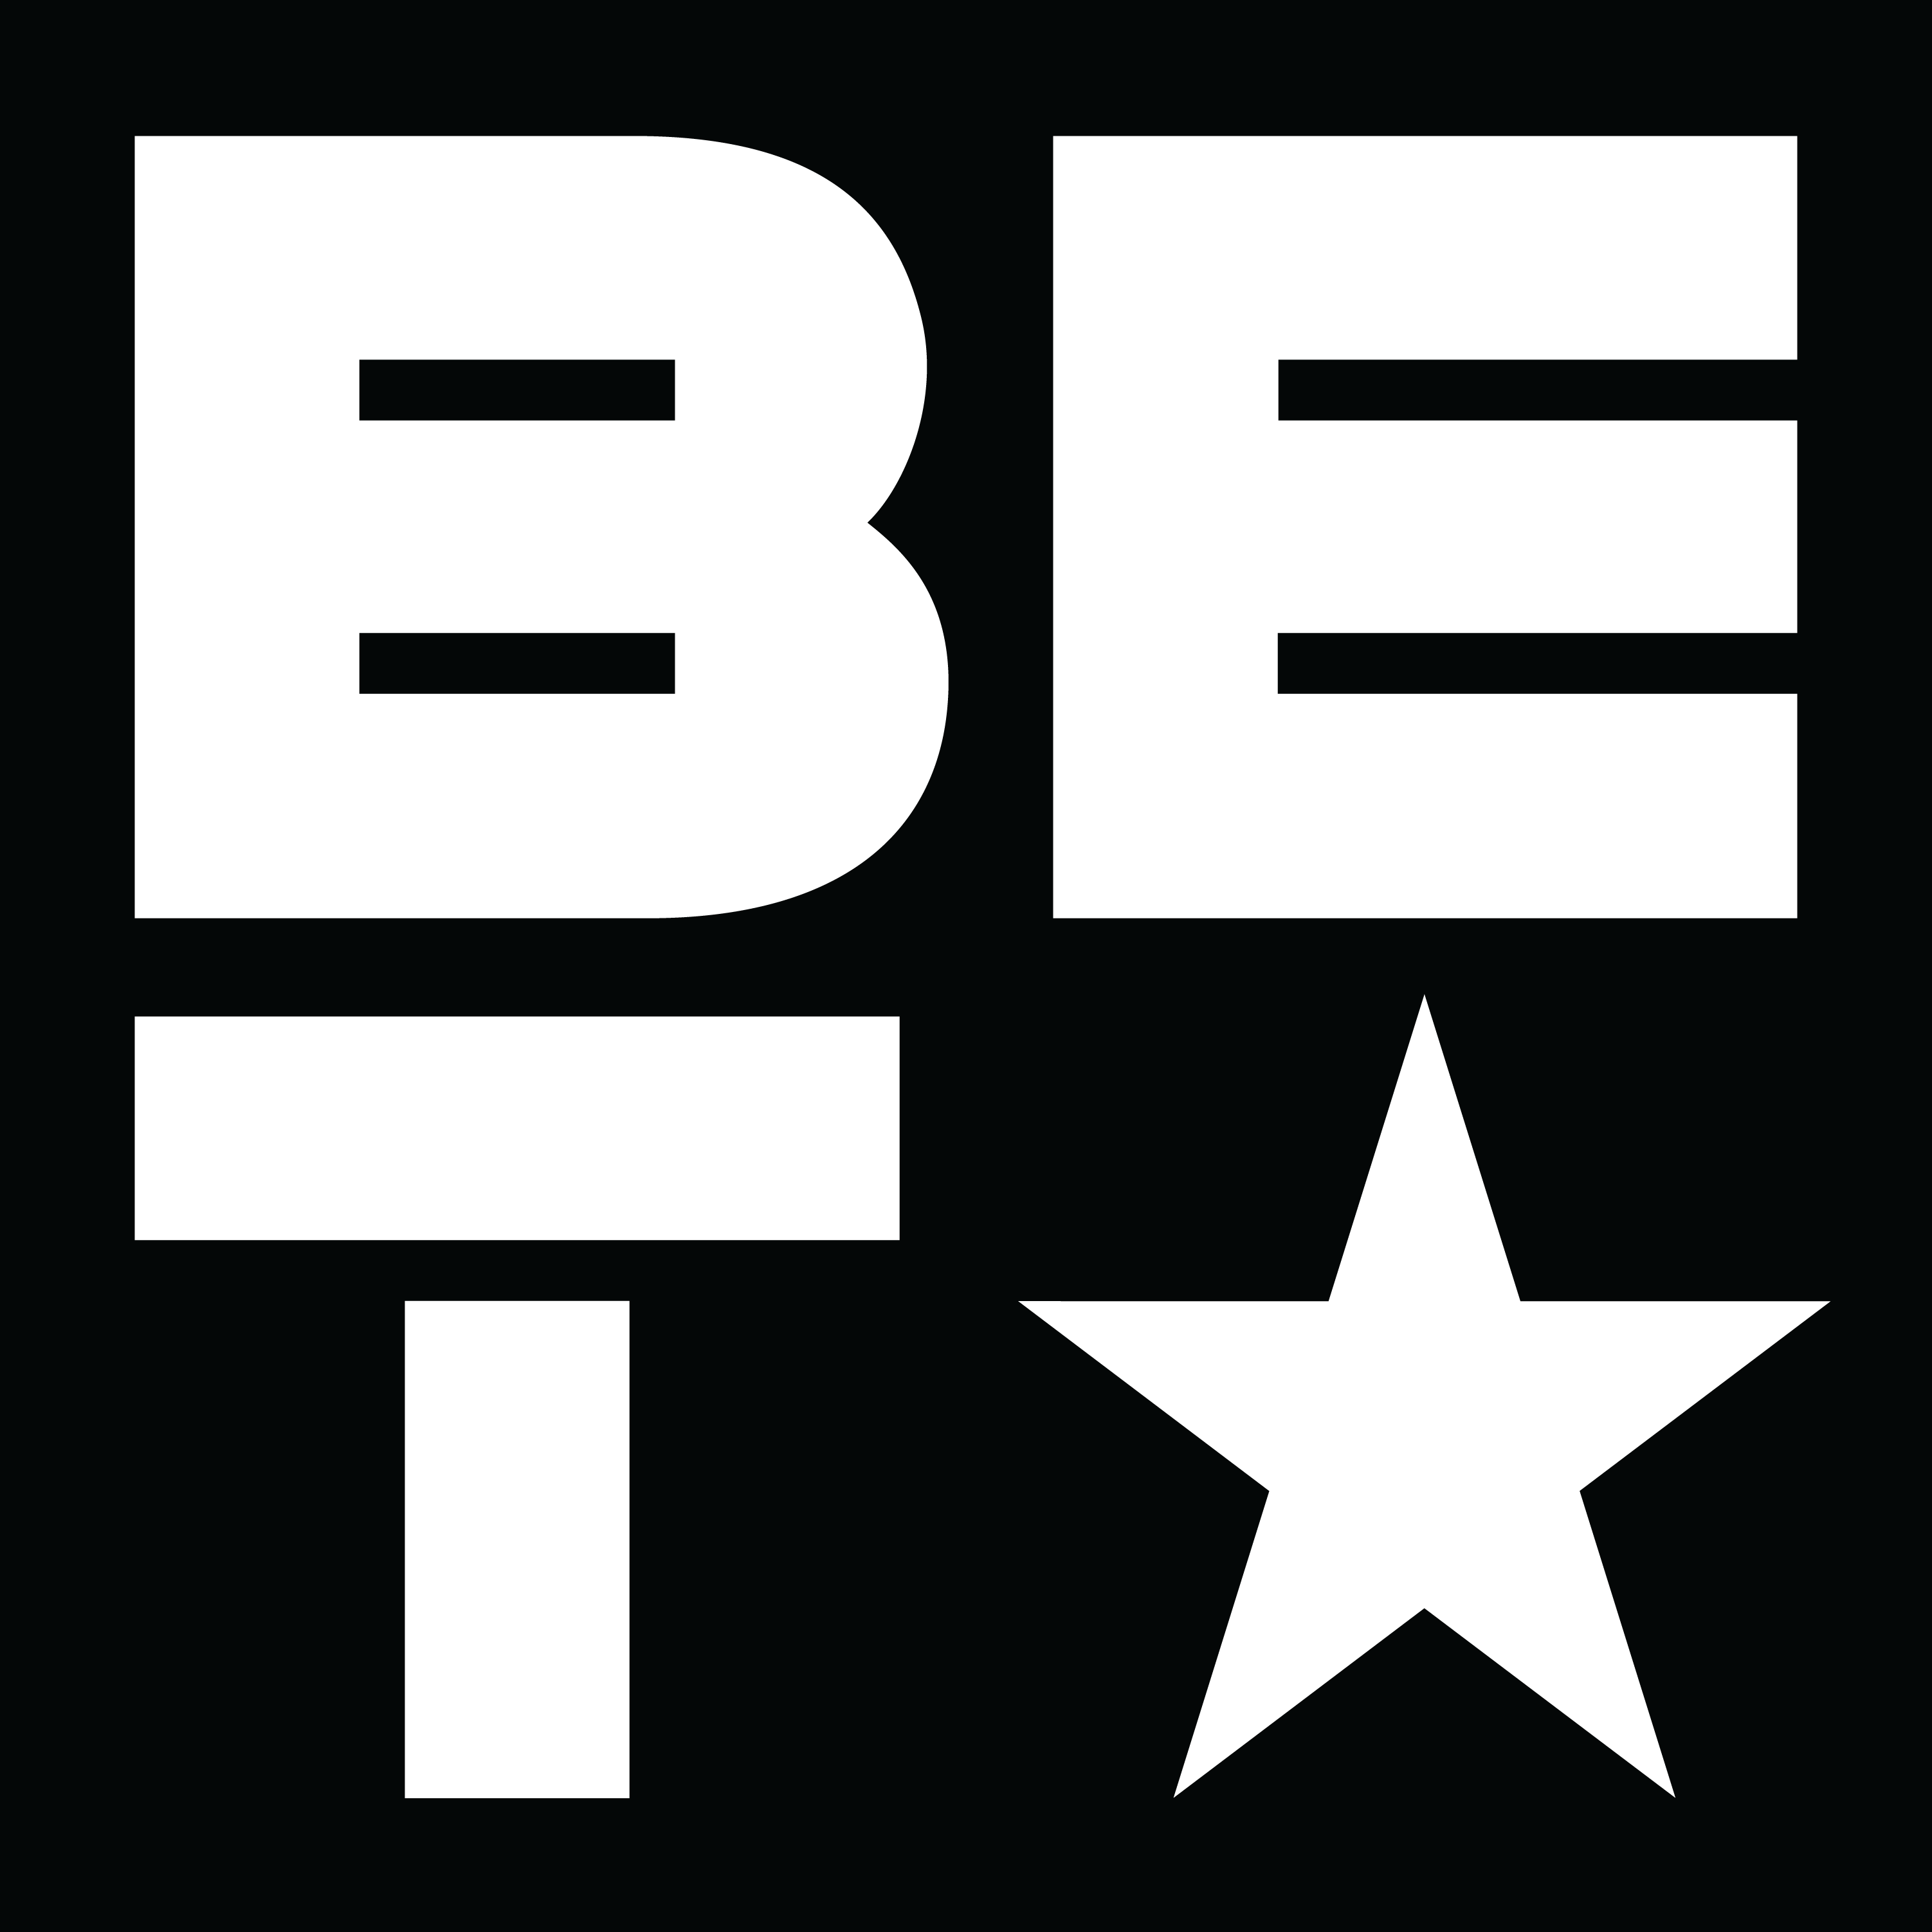 Channel logo for Black Entertainment Television (BET)